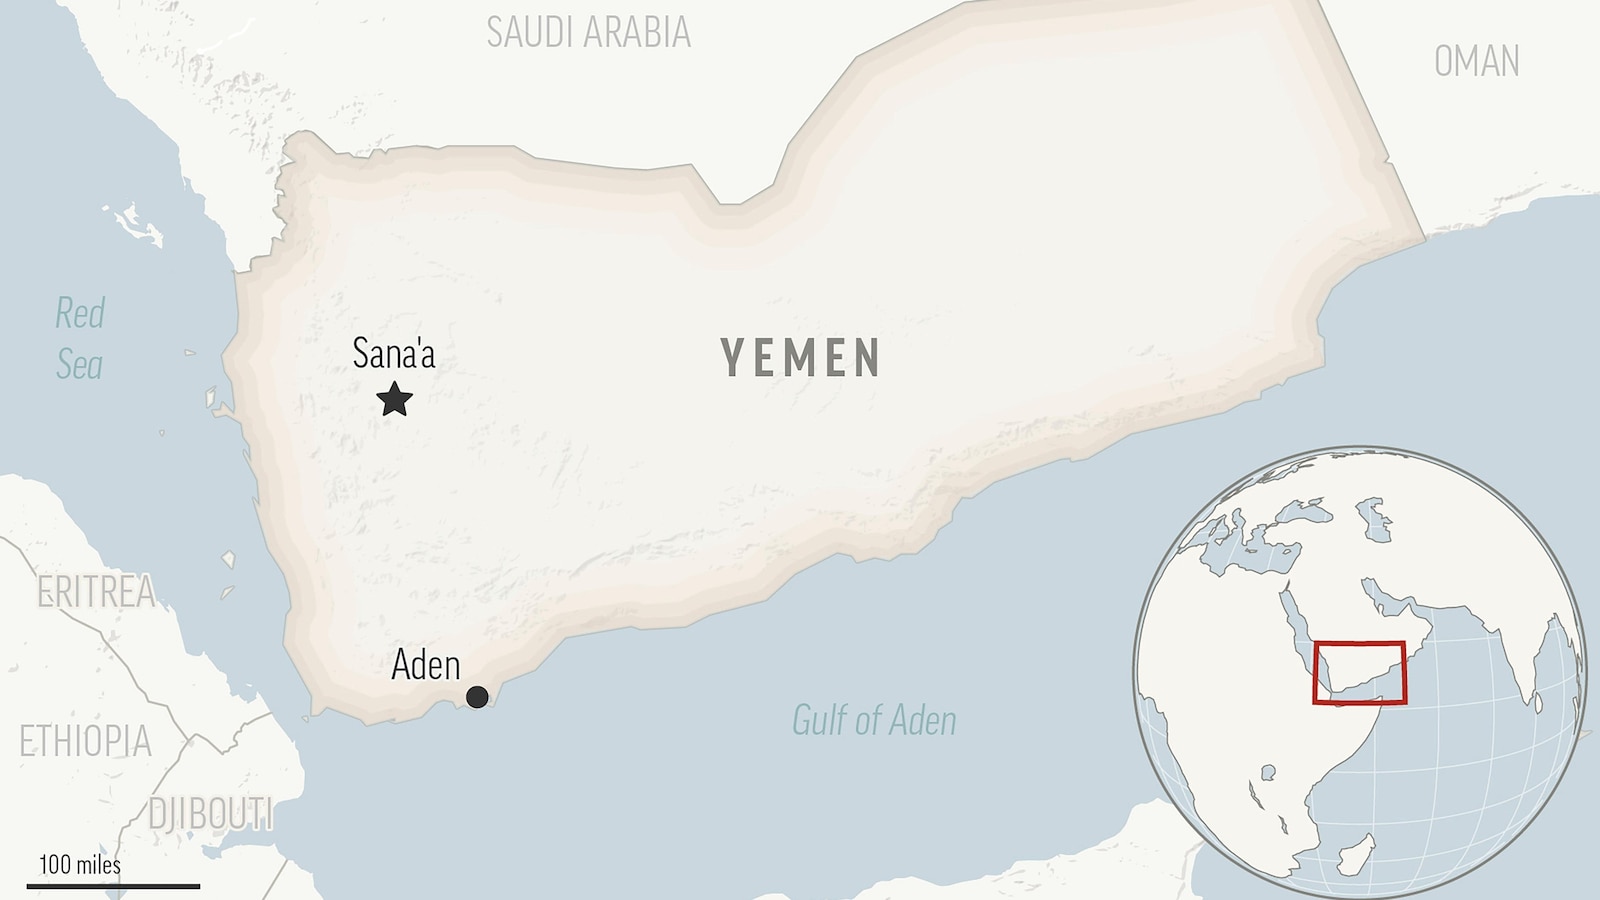 Houthi rebels strike a US-owned ship off the coast of Yemen in the Gulf of Aden, raising tensions